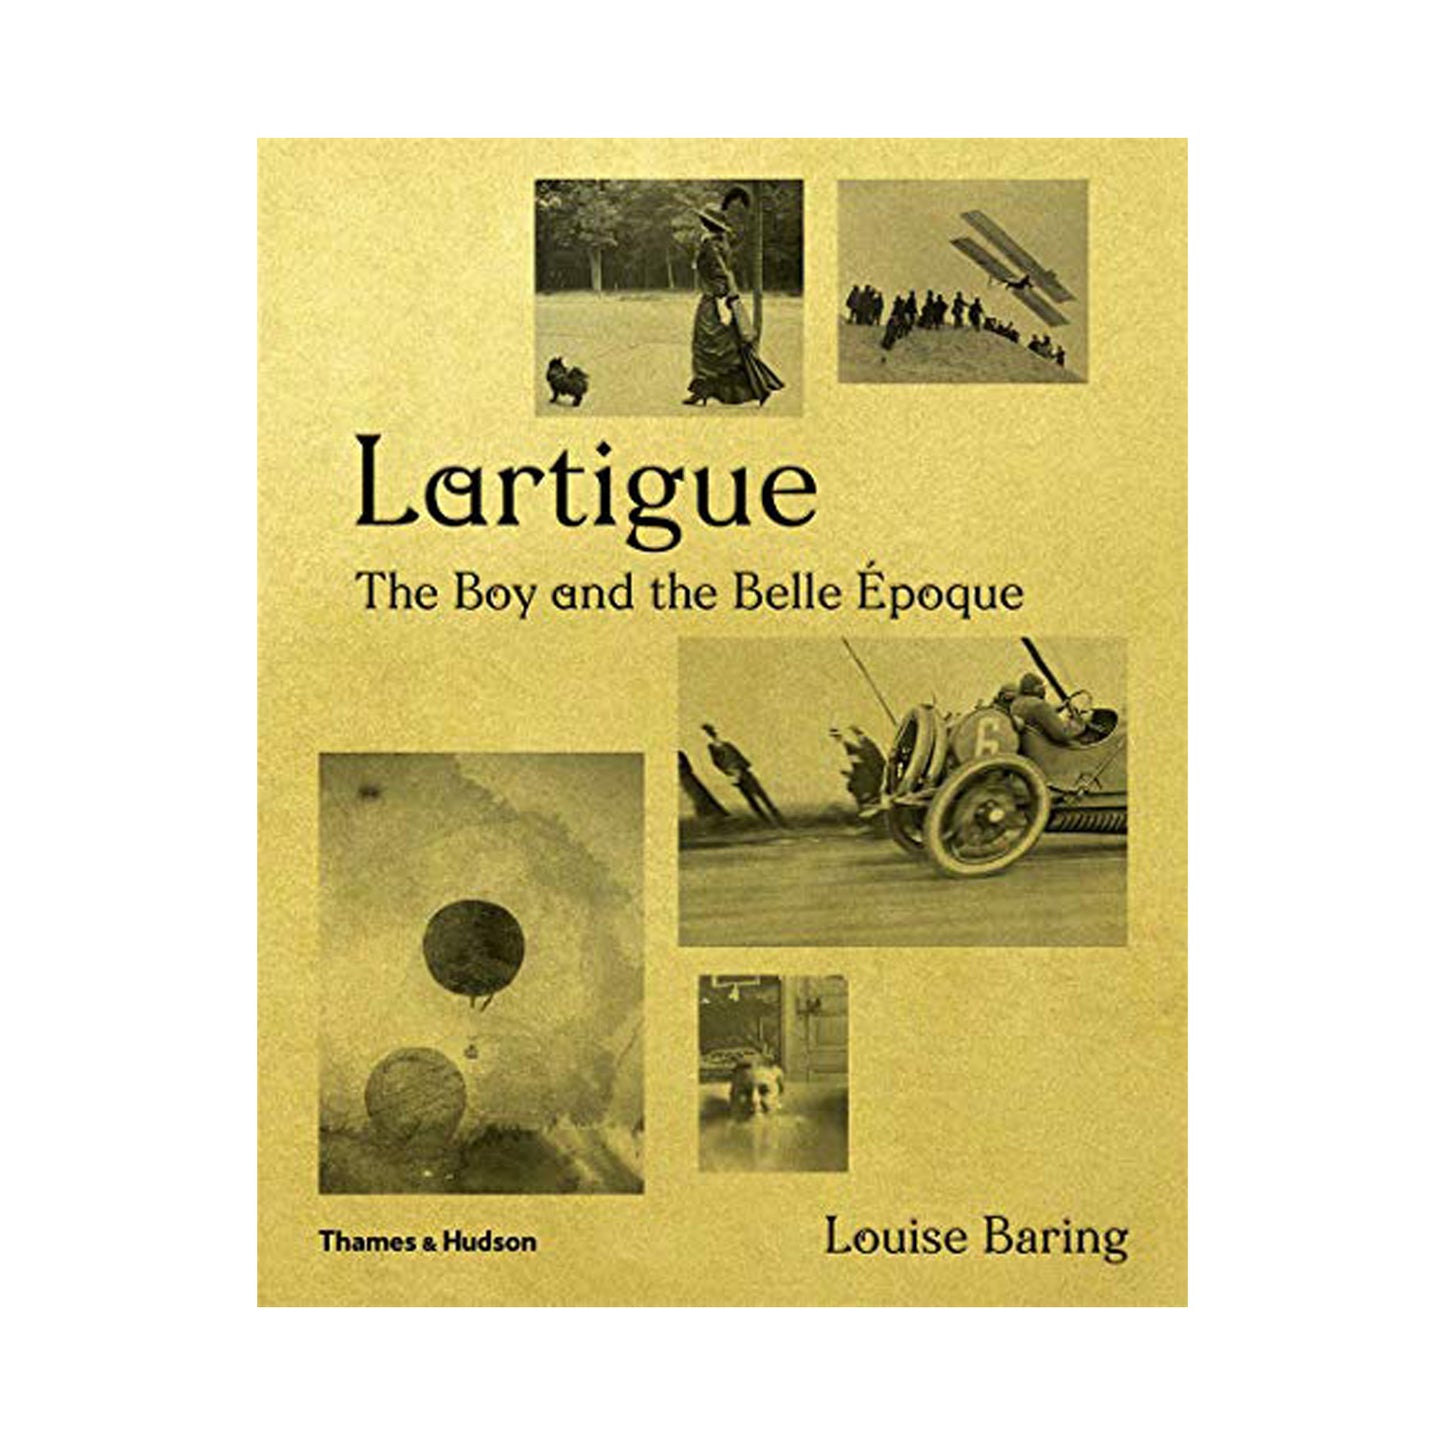 Lartigue: The Boy and the Belle Époque by Louise Baring